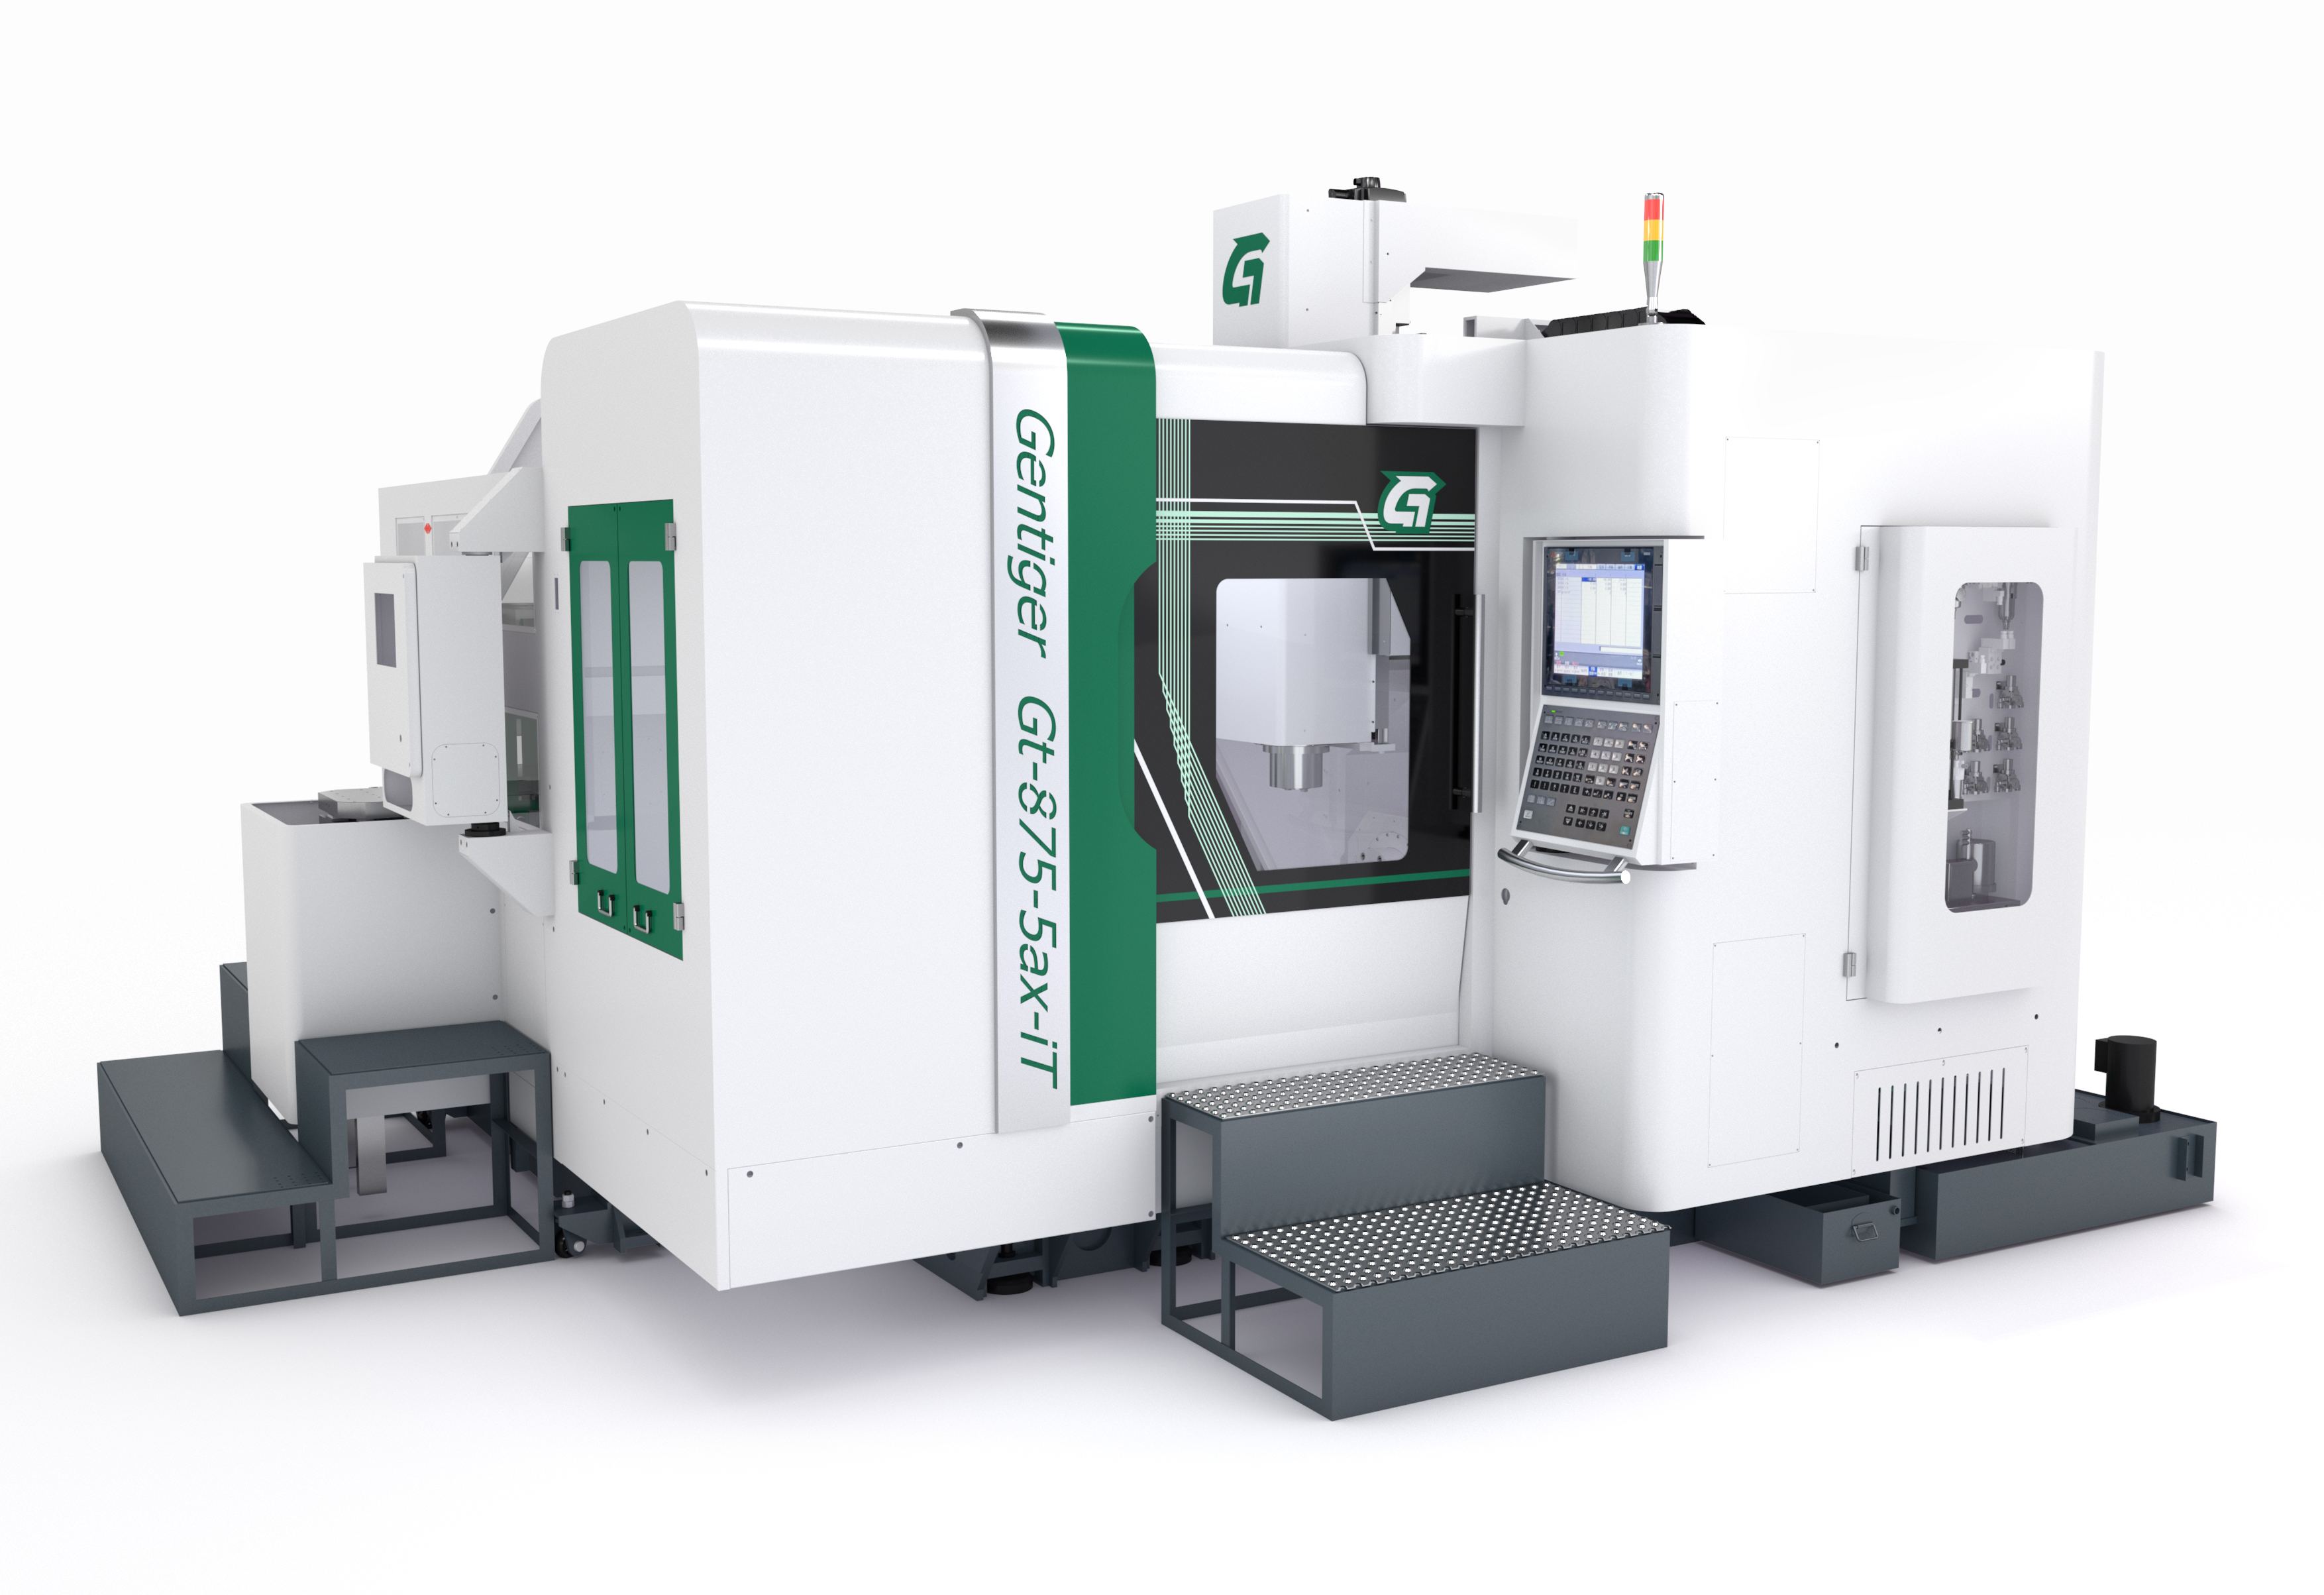 Intelligent Integrated High Speed 5 Axis Machining Center_GT-875-5AX-iT